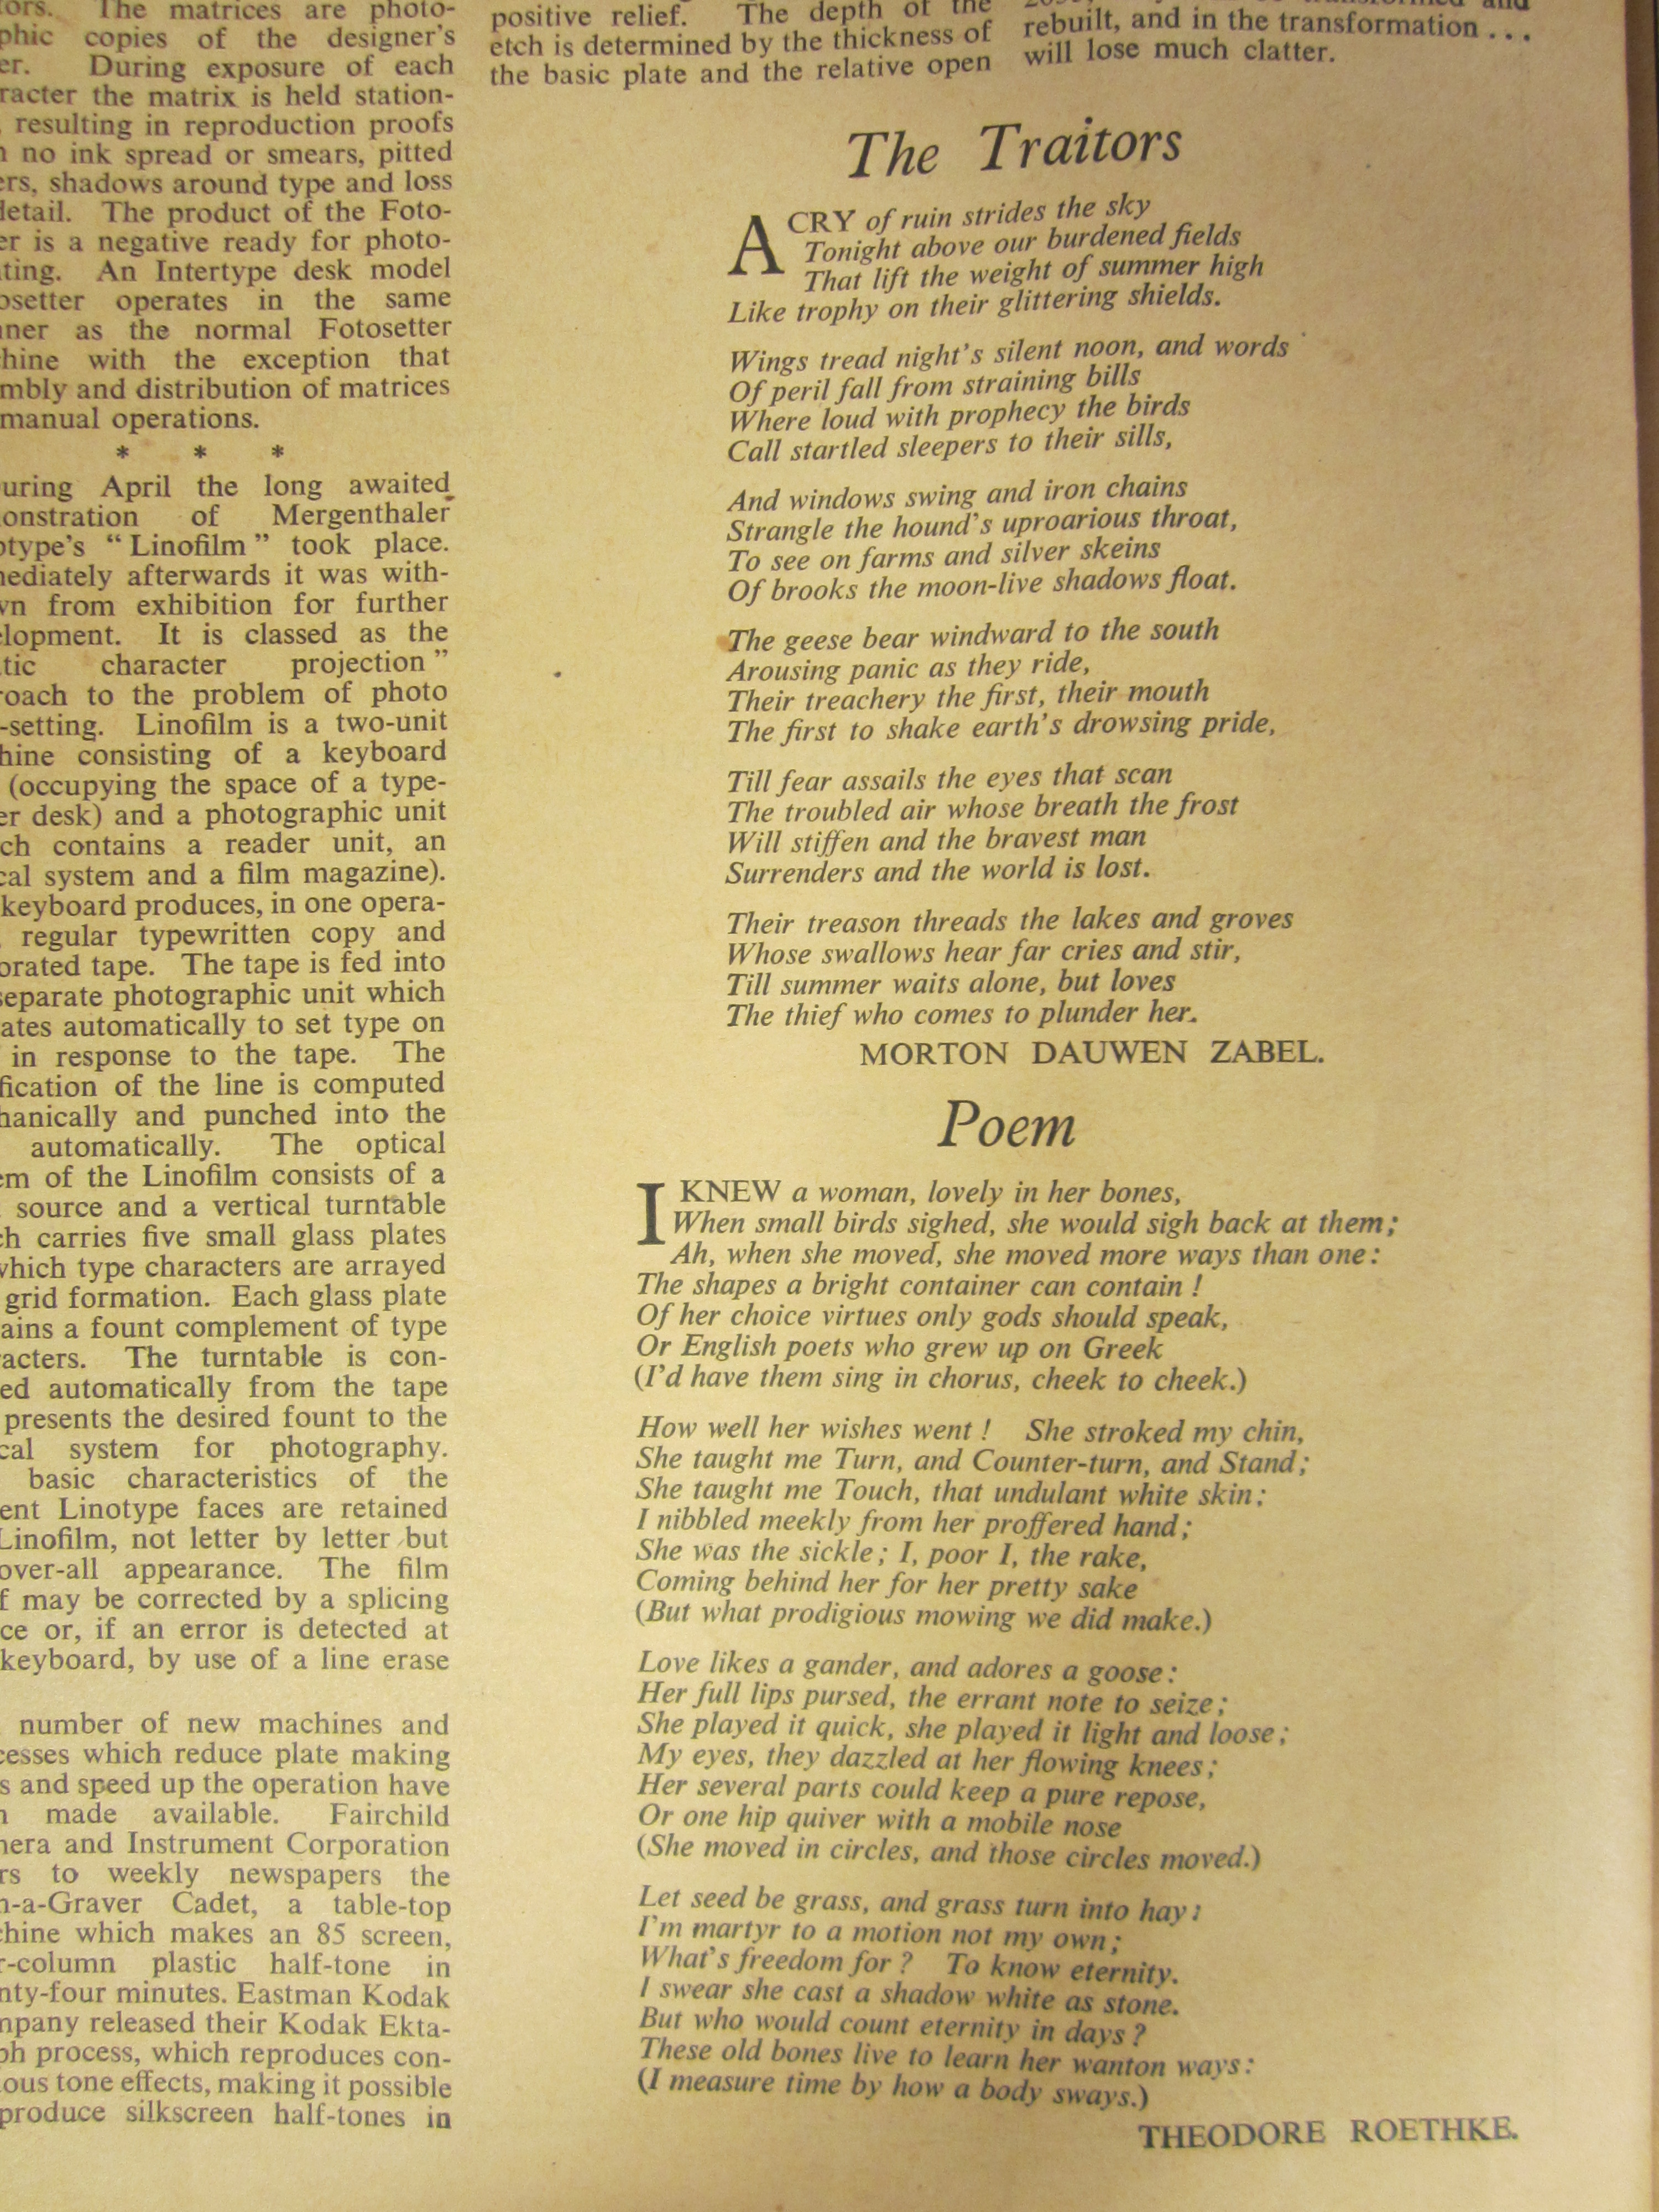 His poem “The Traitors” appearing in The Times Literary Supplement on American writing (PS221 .T5 1954. Photograph by Donna Stapley)